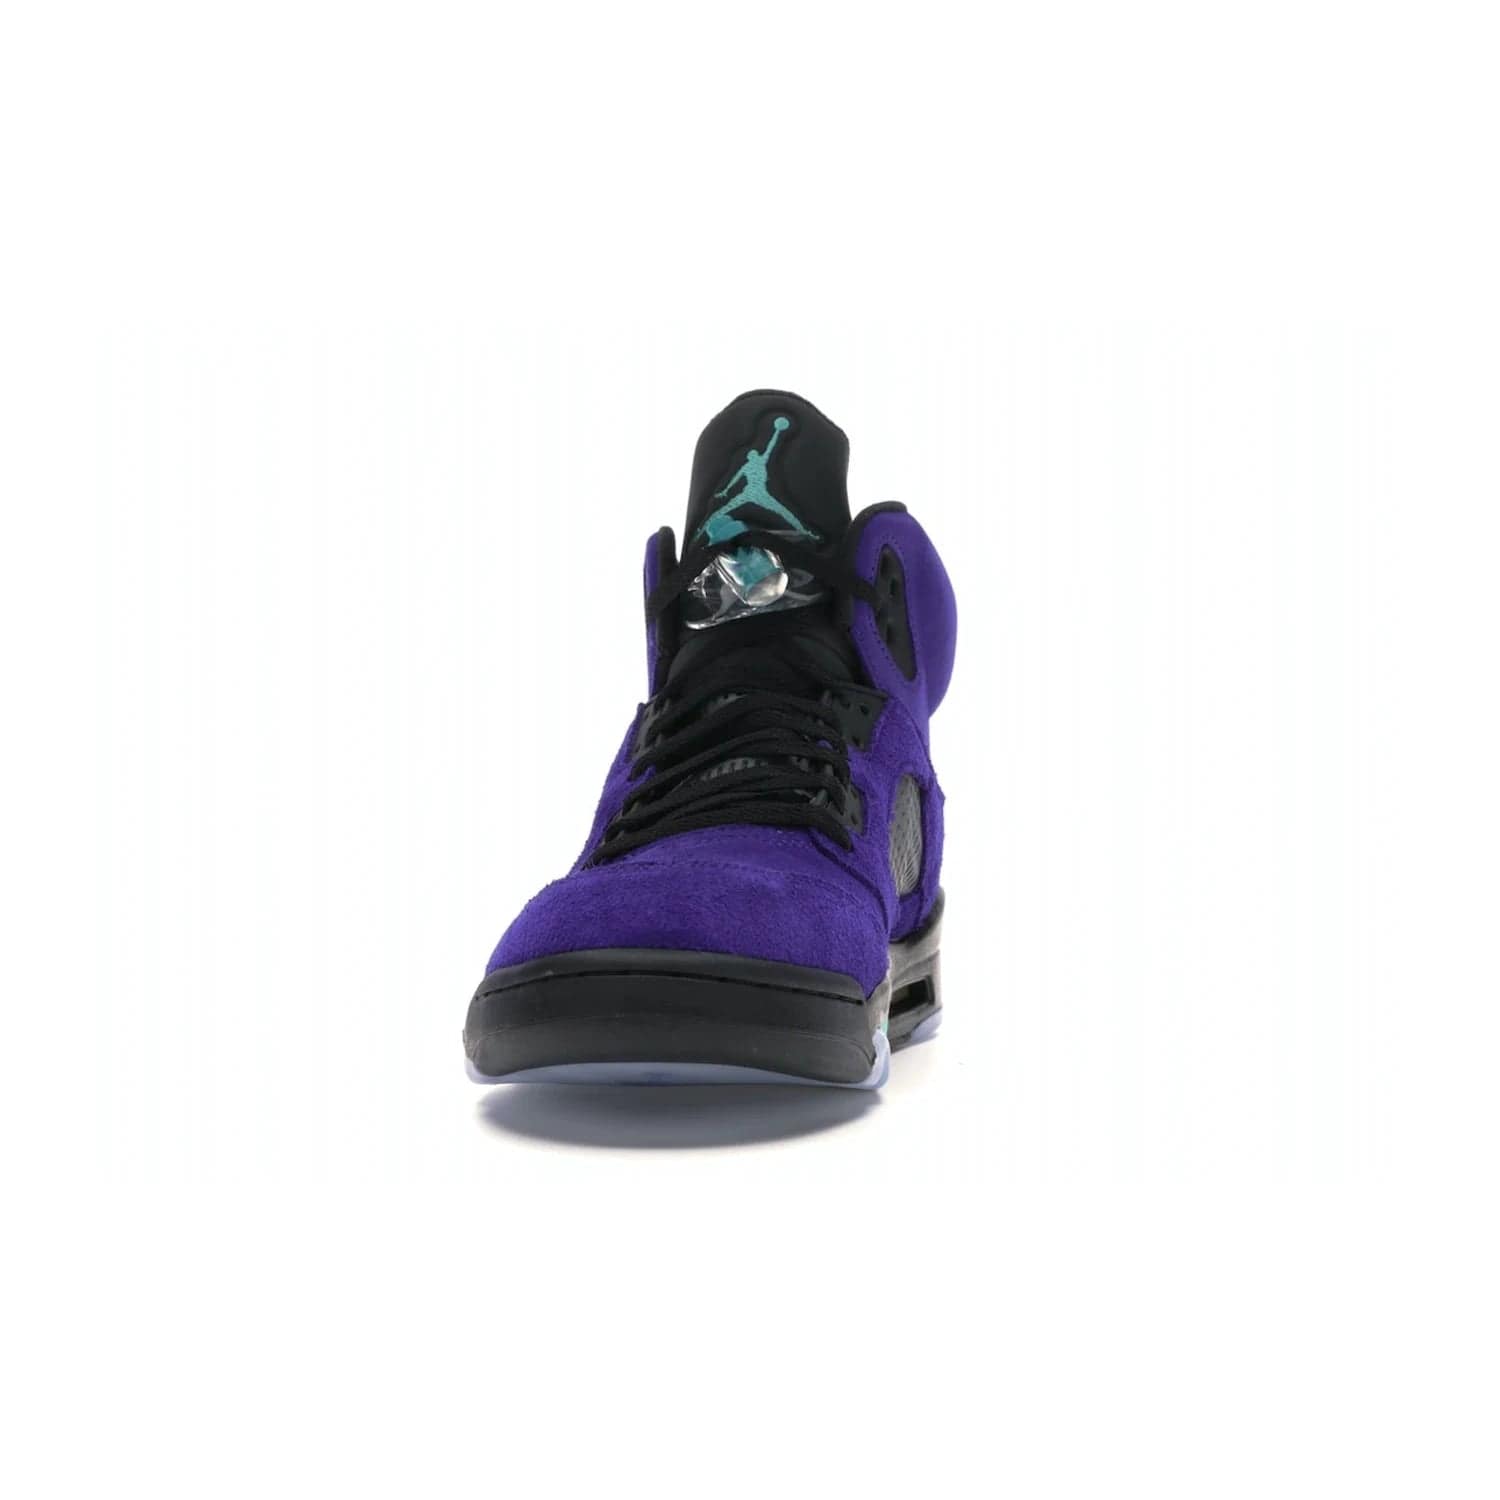 Jordan 5 Retro Alternate Grape - Image 11 - Only at www.BallersClubKickz.com - Bring the classic Jordan 5 Retro Alternate Grape to your sneaker collection! Featuring a purple suede upper, charcoal underlays, green detailing, and an icy and green outsole. Releasing for the first time since 1990, don't miss this chance to add a piece of sneaker history to your collection.